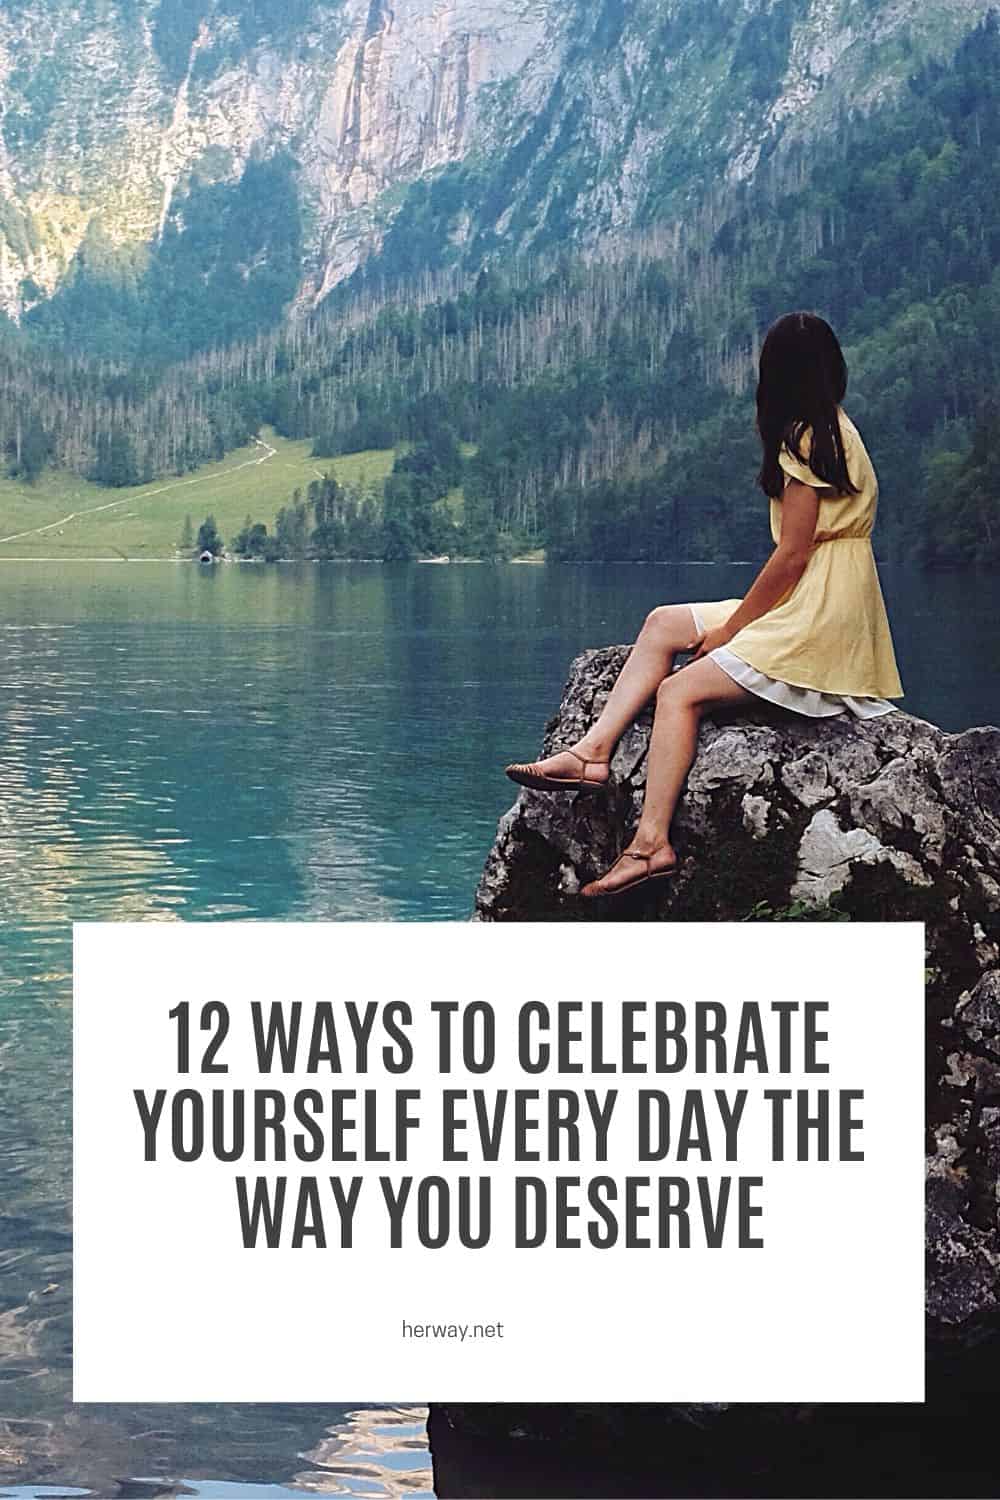 12 Ways To Celebrate Yourself Every Day The Way You Deserve